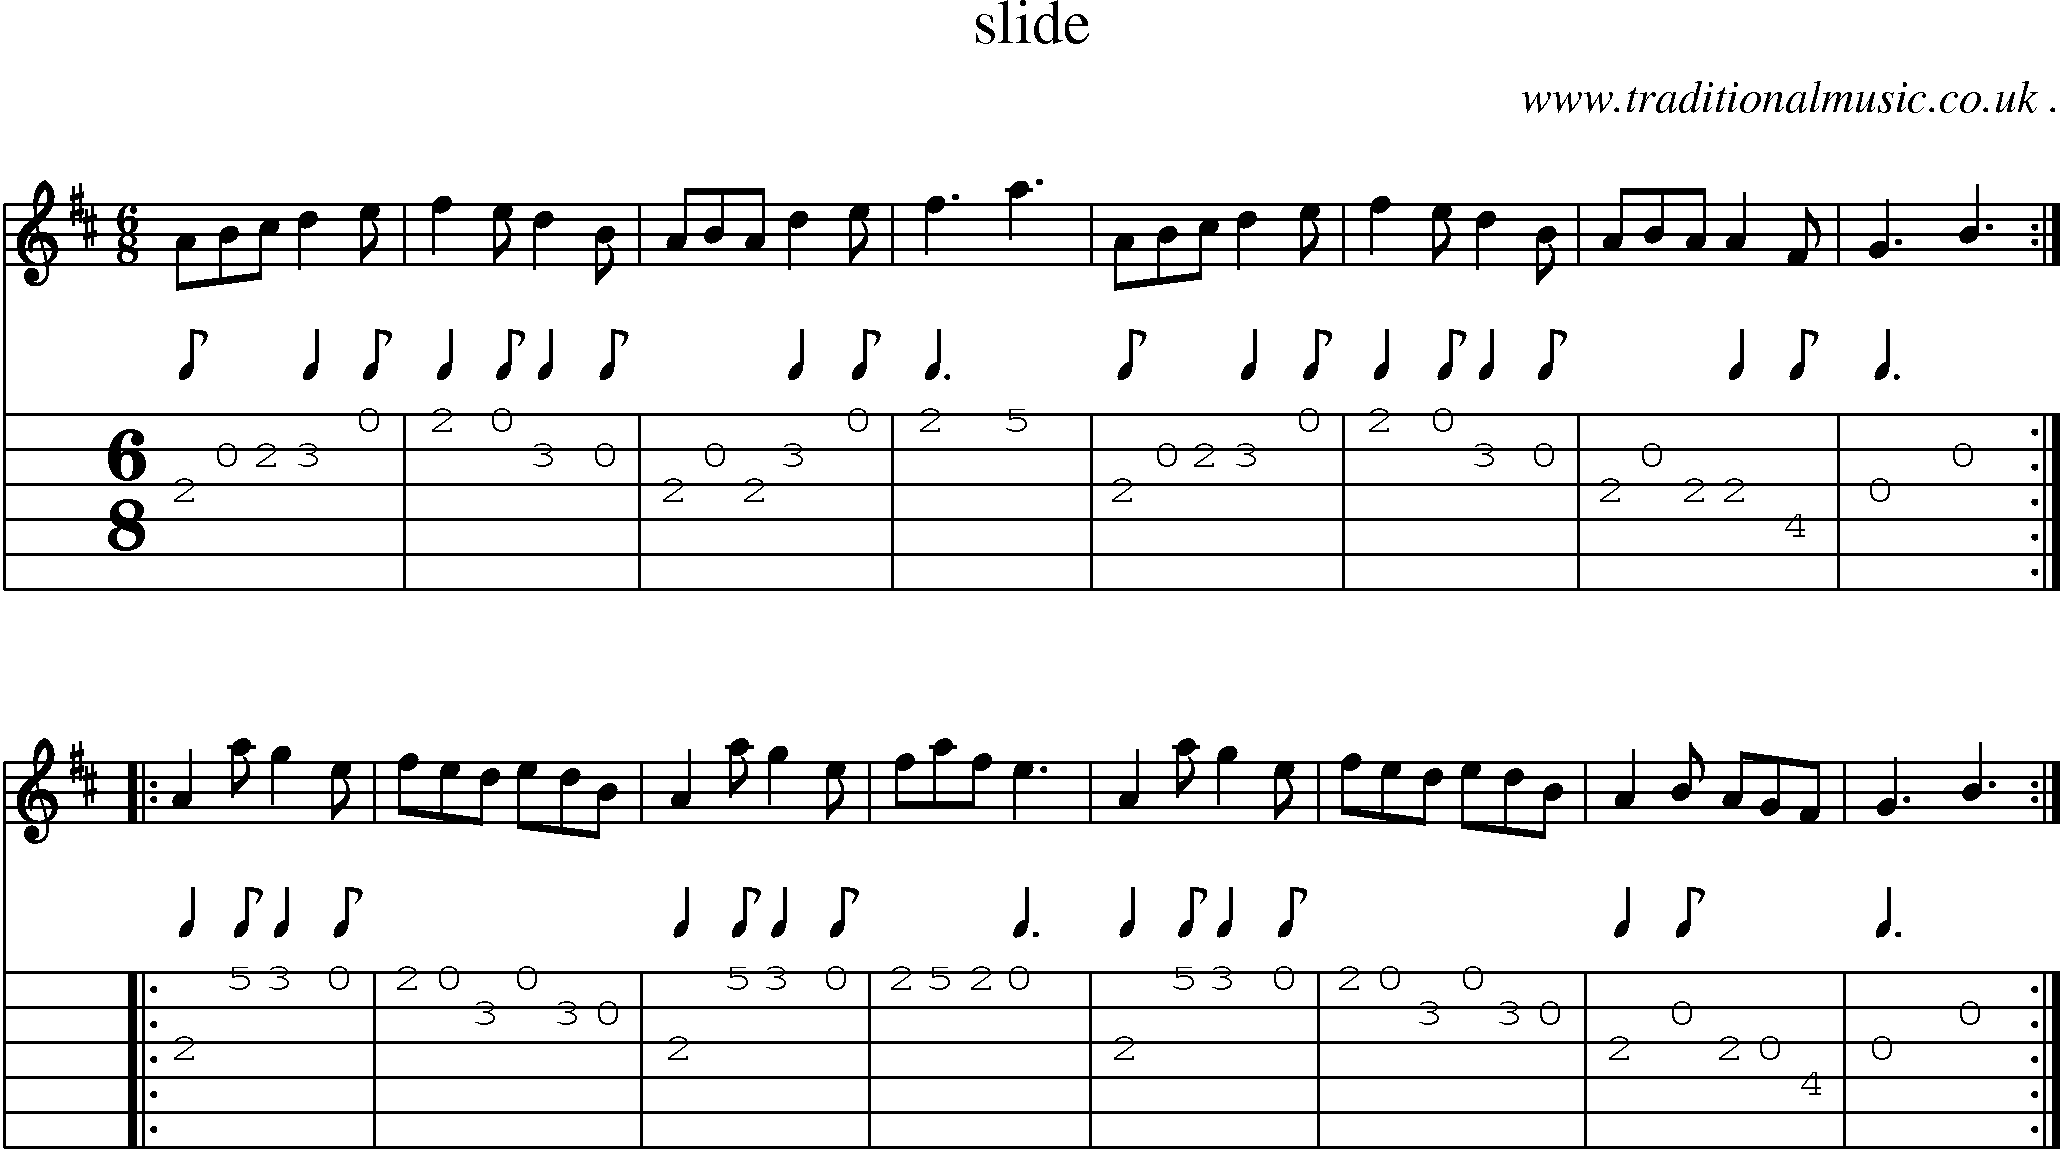 Sheet-Music and Guitar Tabs for Slide